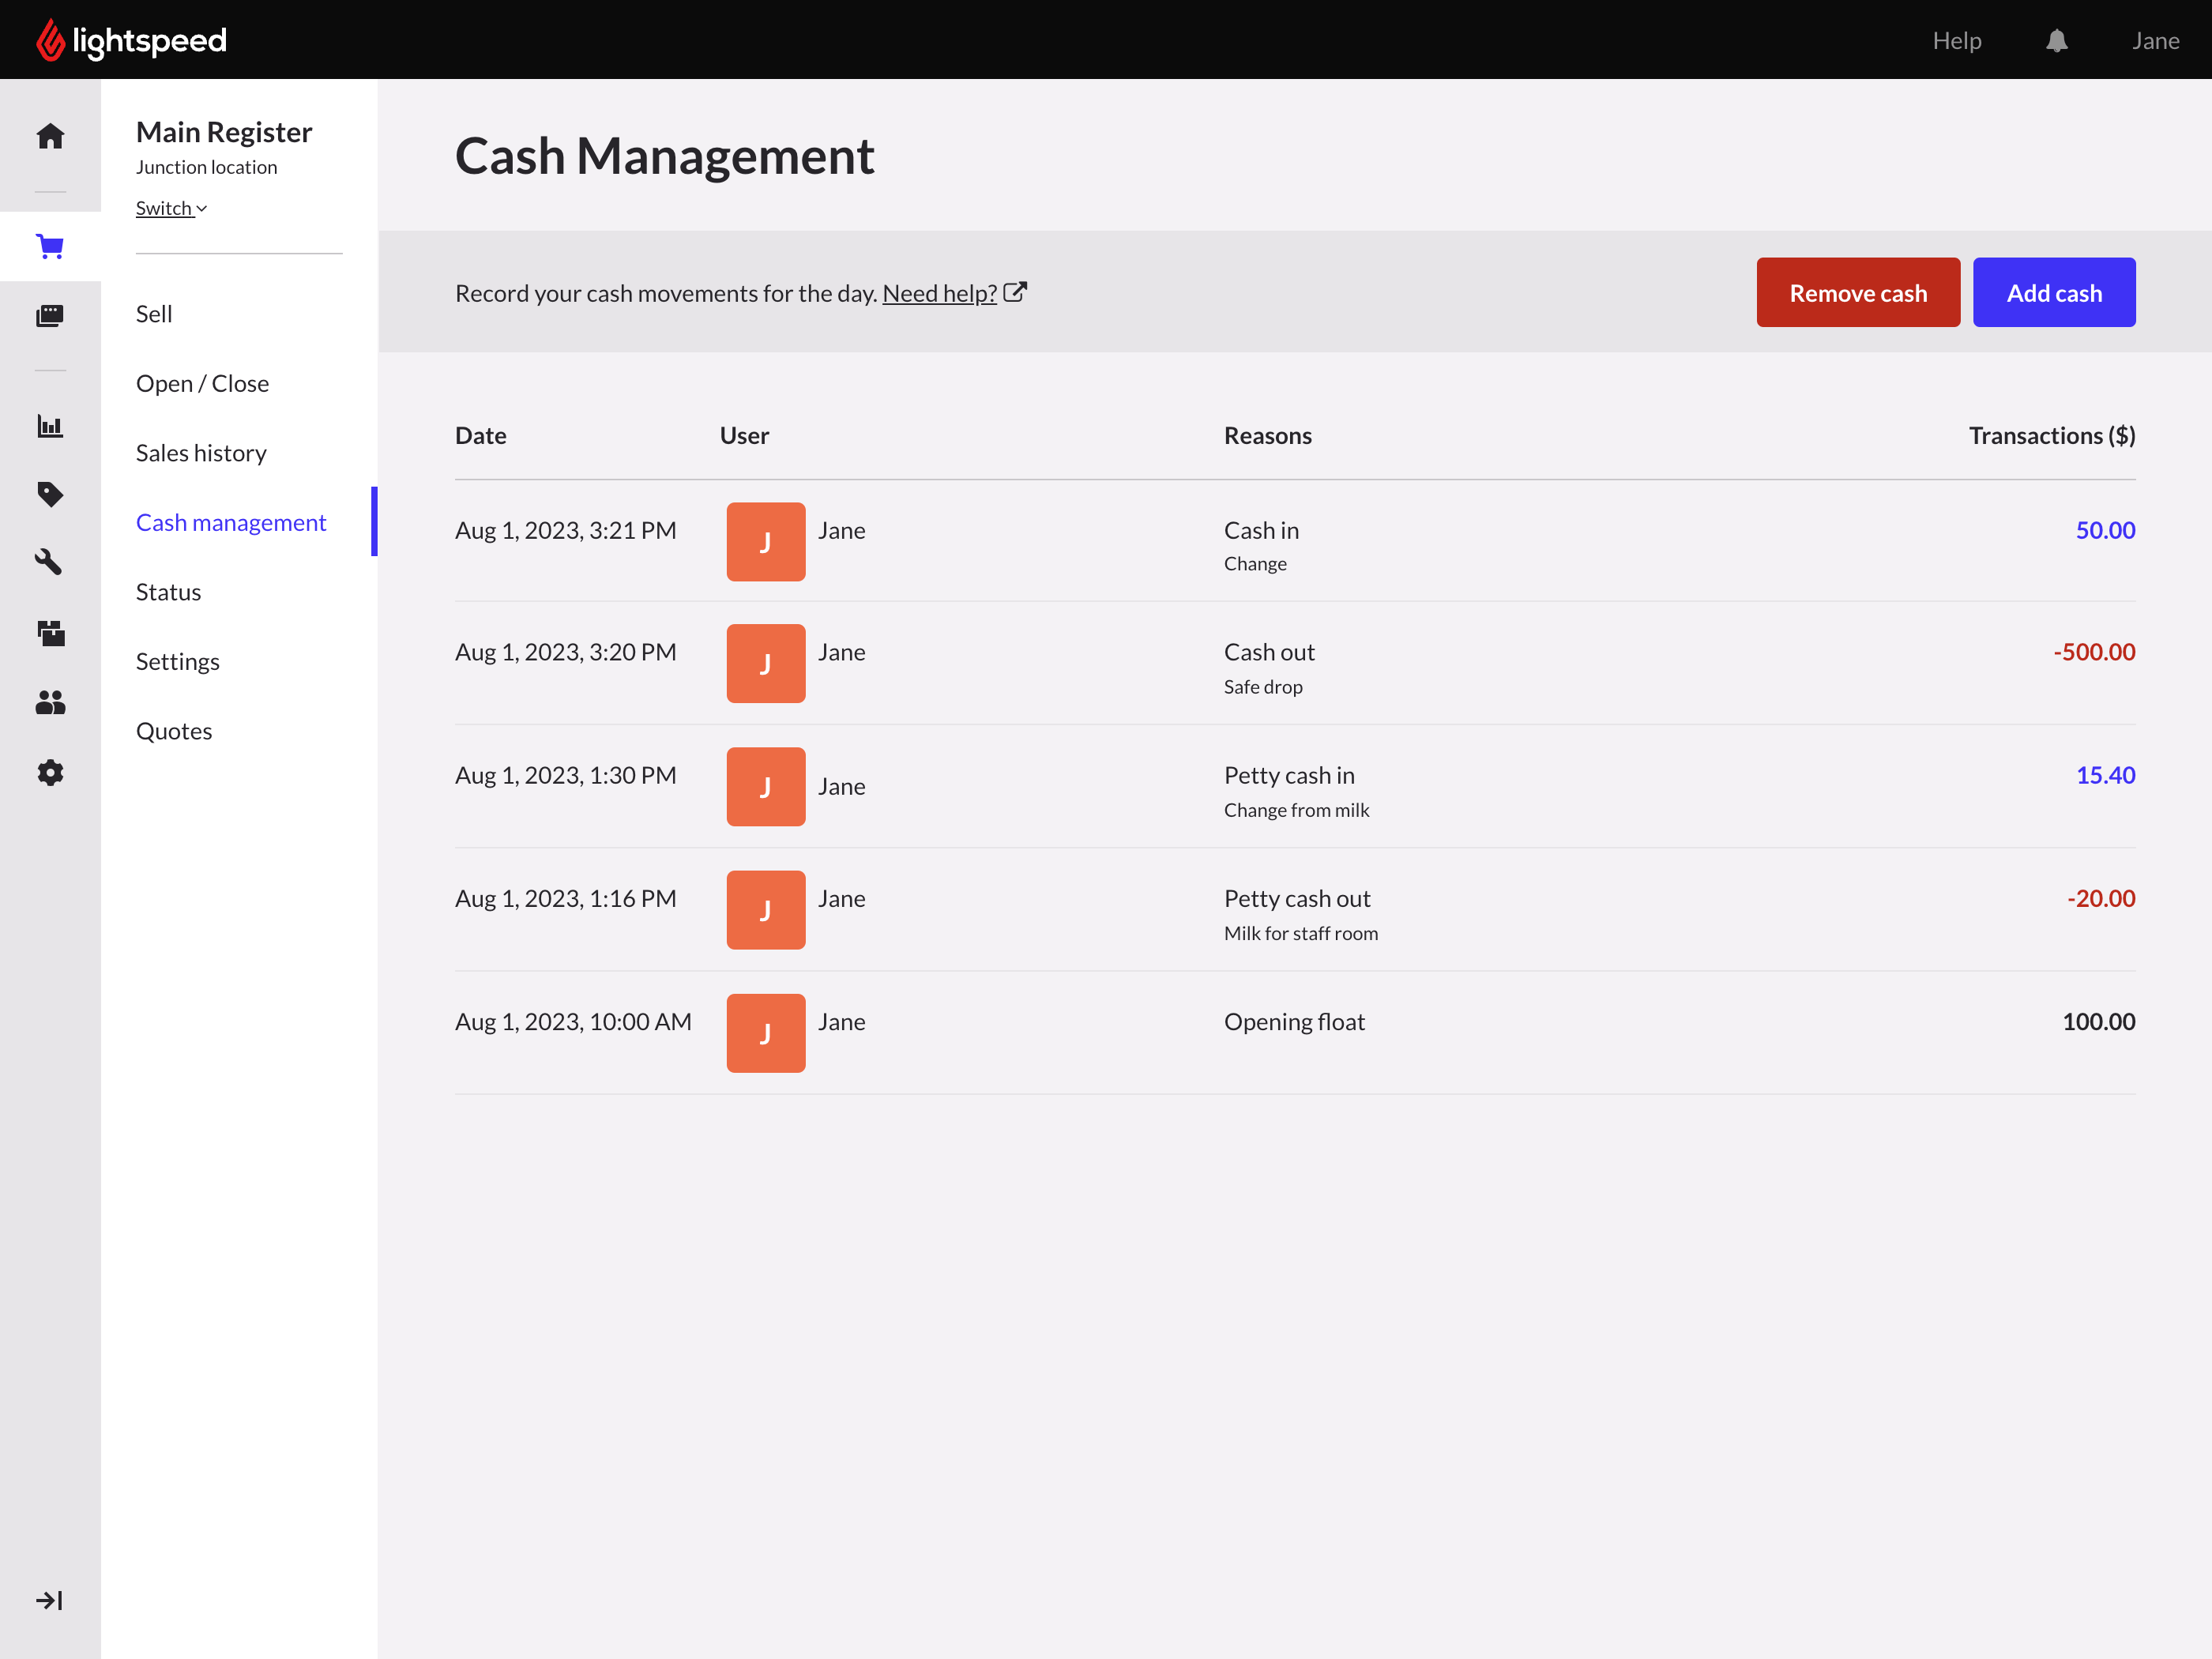 Cash management page with remove cash and add cash buttons and a record of cash movements for the day.